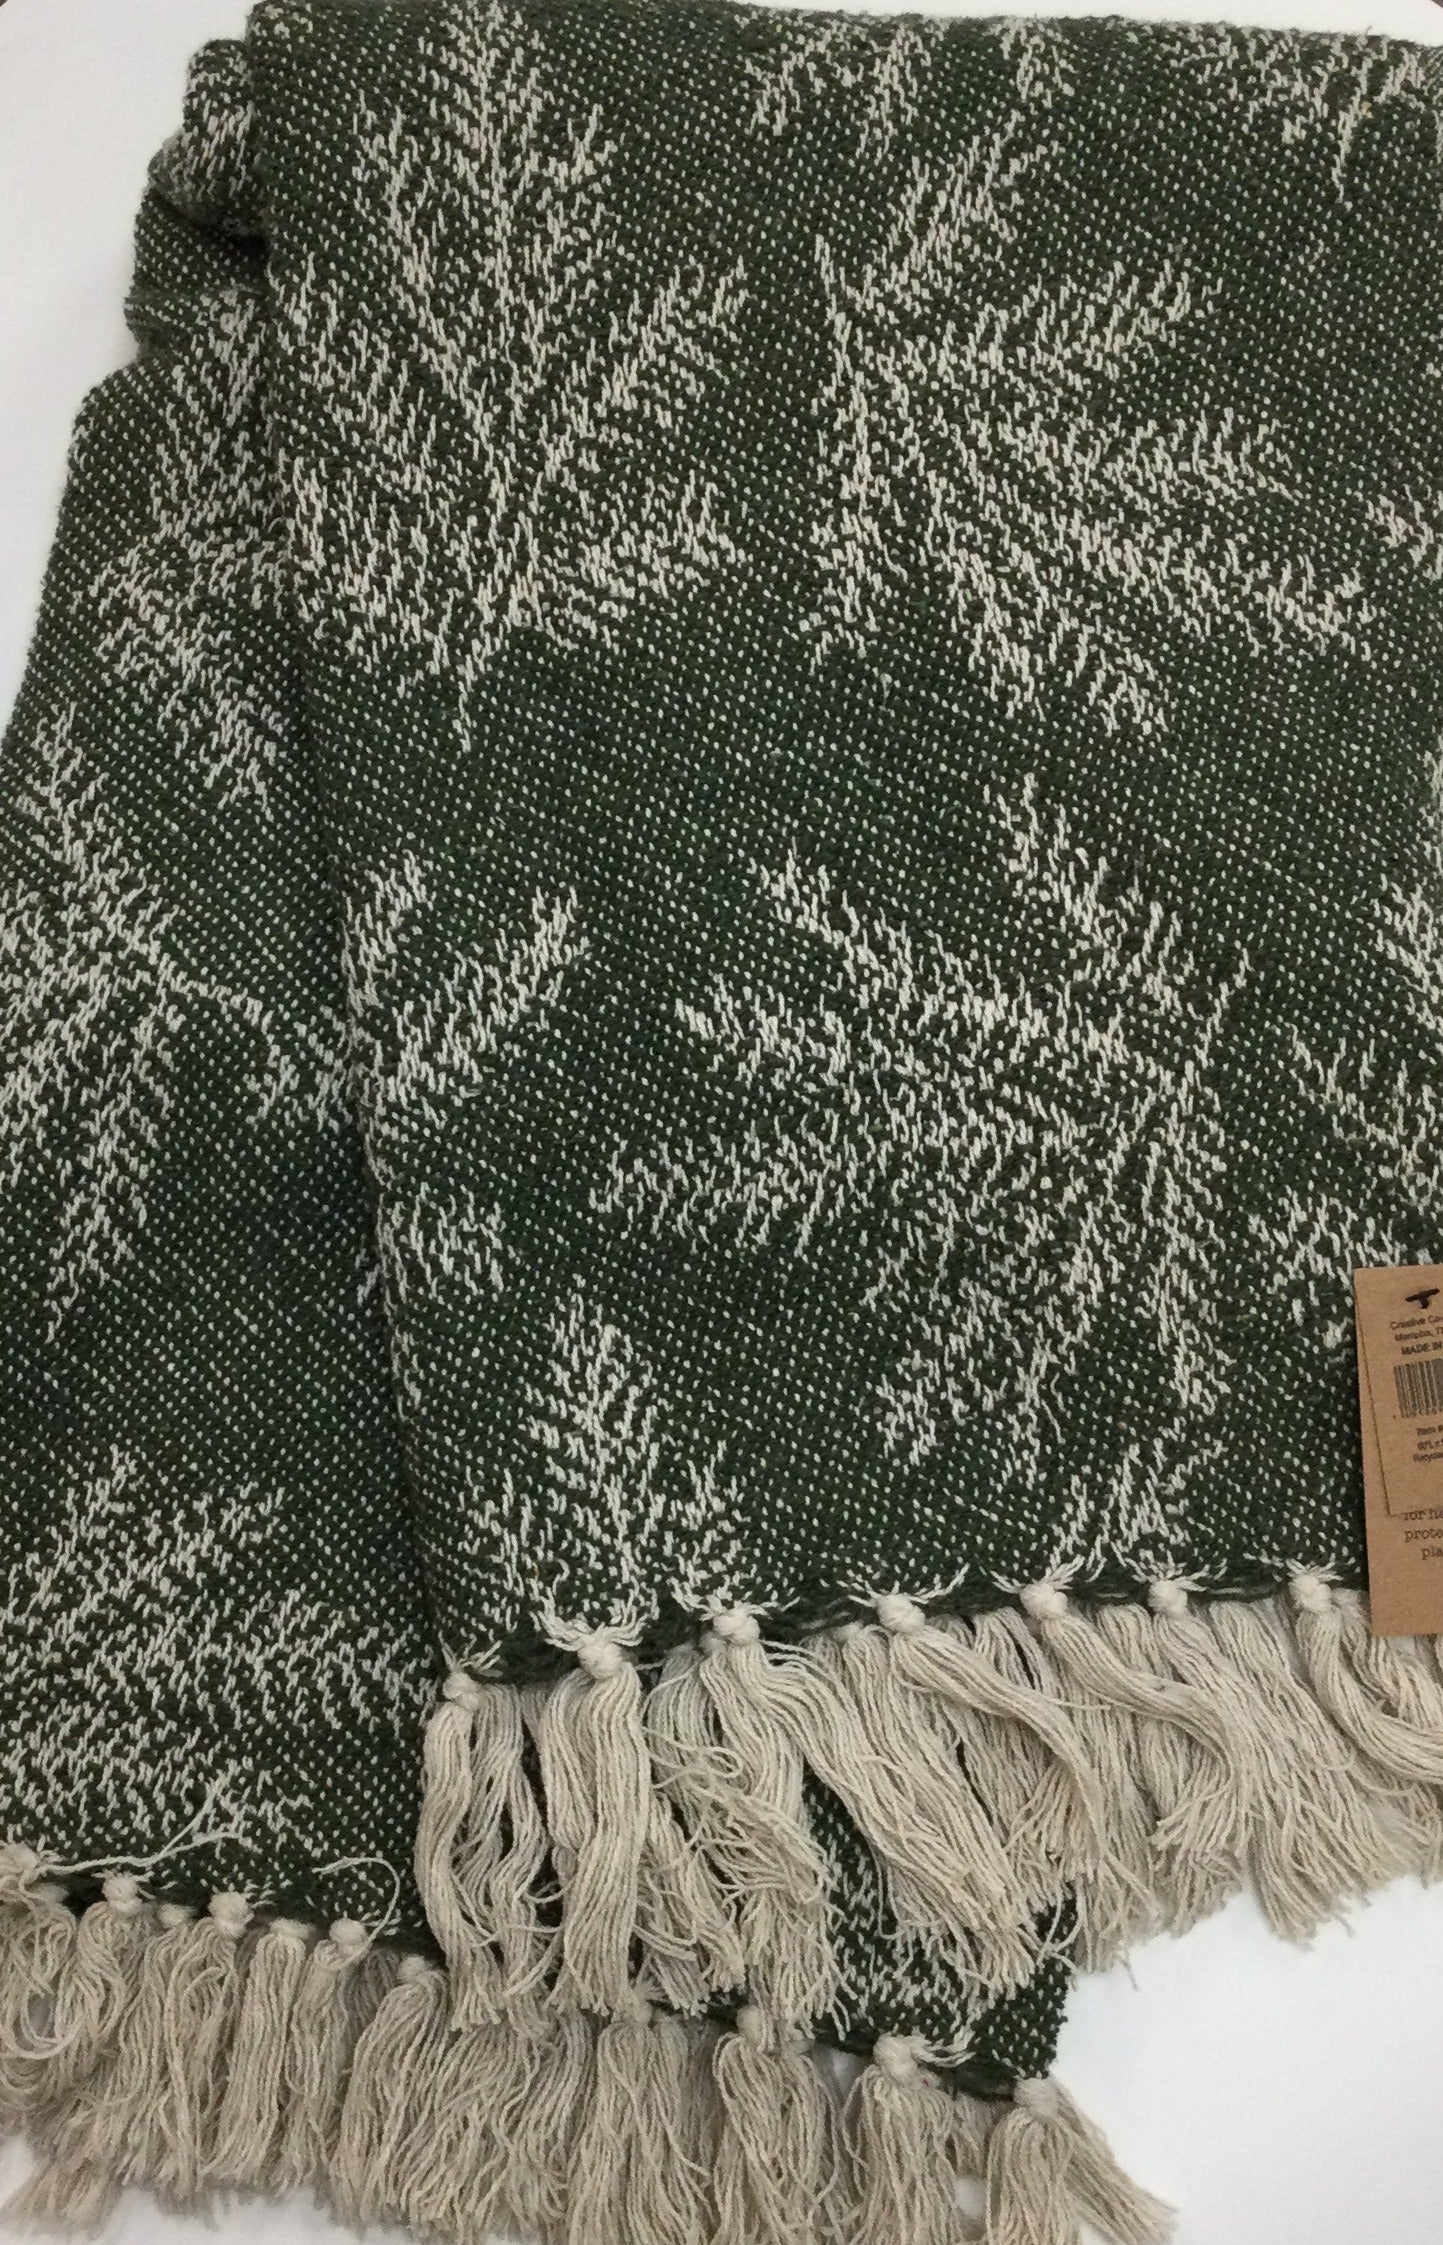 60" x 50" Recycled Cotton Blanket w/ Pine Needles Pattern, Green & Cream Color